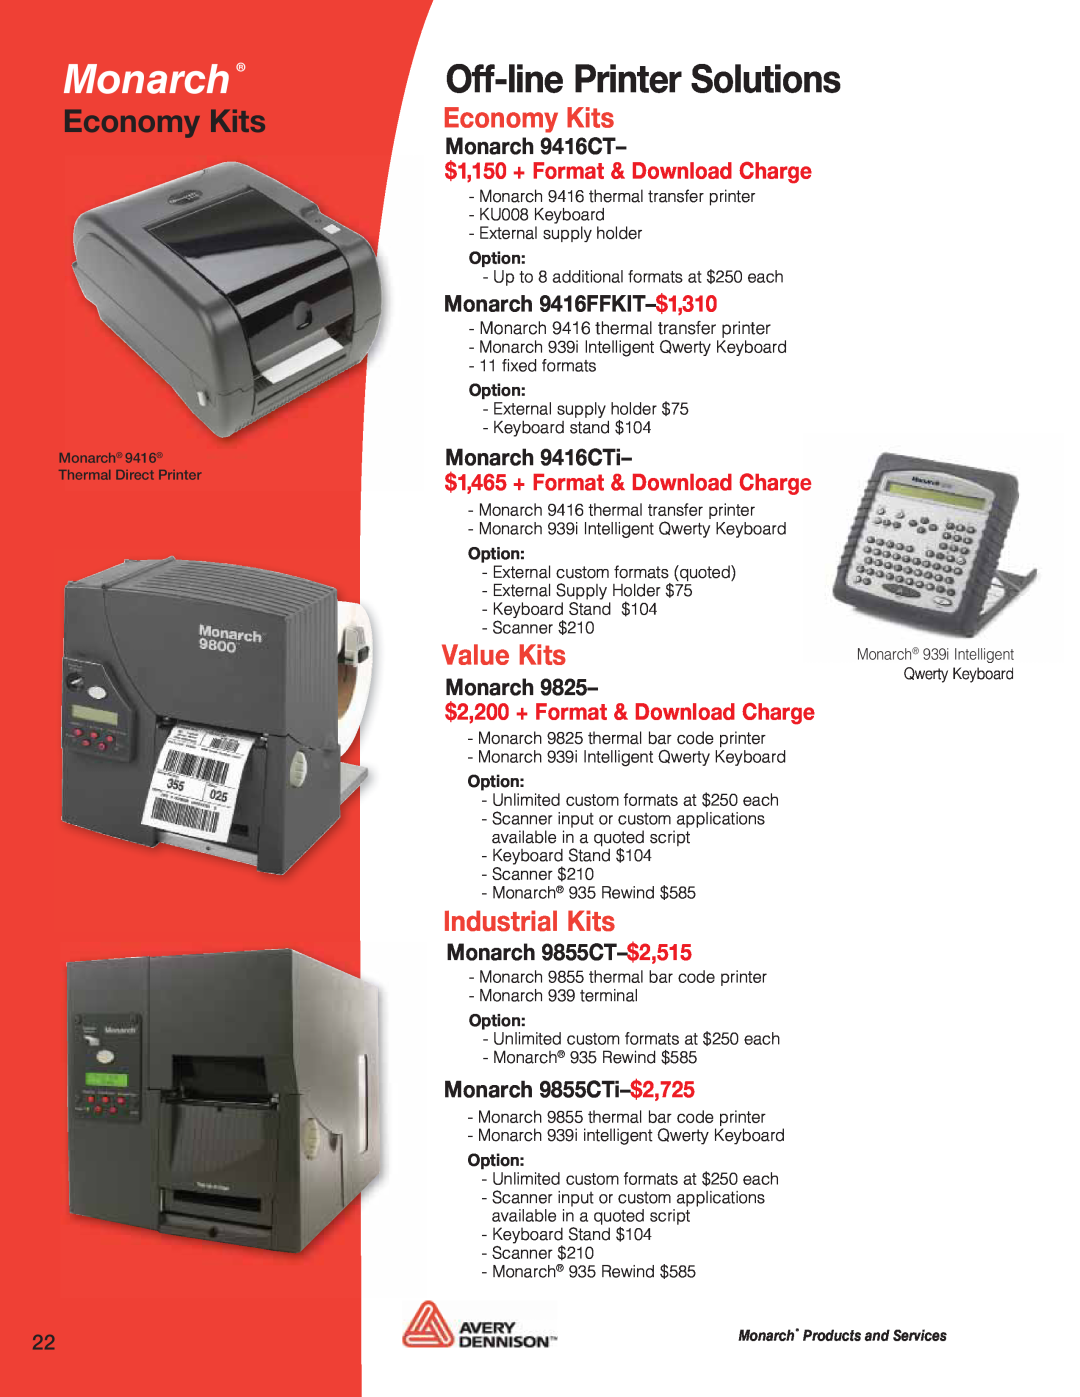 Avery 6032 Off-line Printer Solutions, Economy Kits, $1,150 + Format & Download Charge, Monarch 9416CTi, Value Kits 